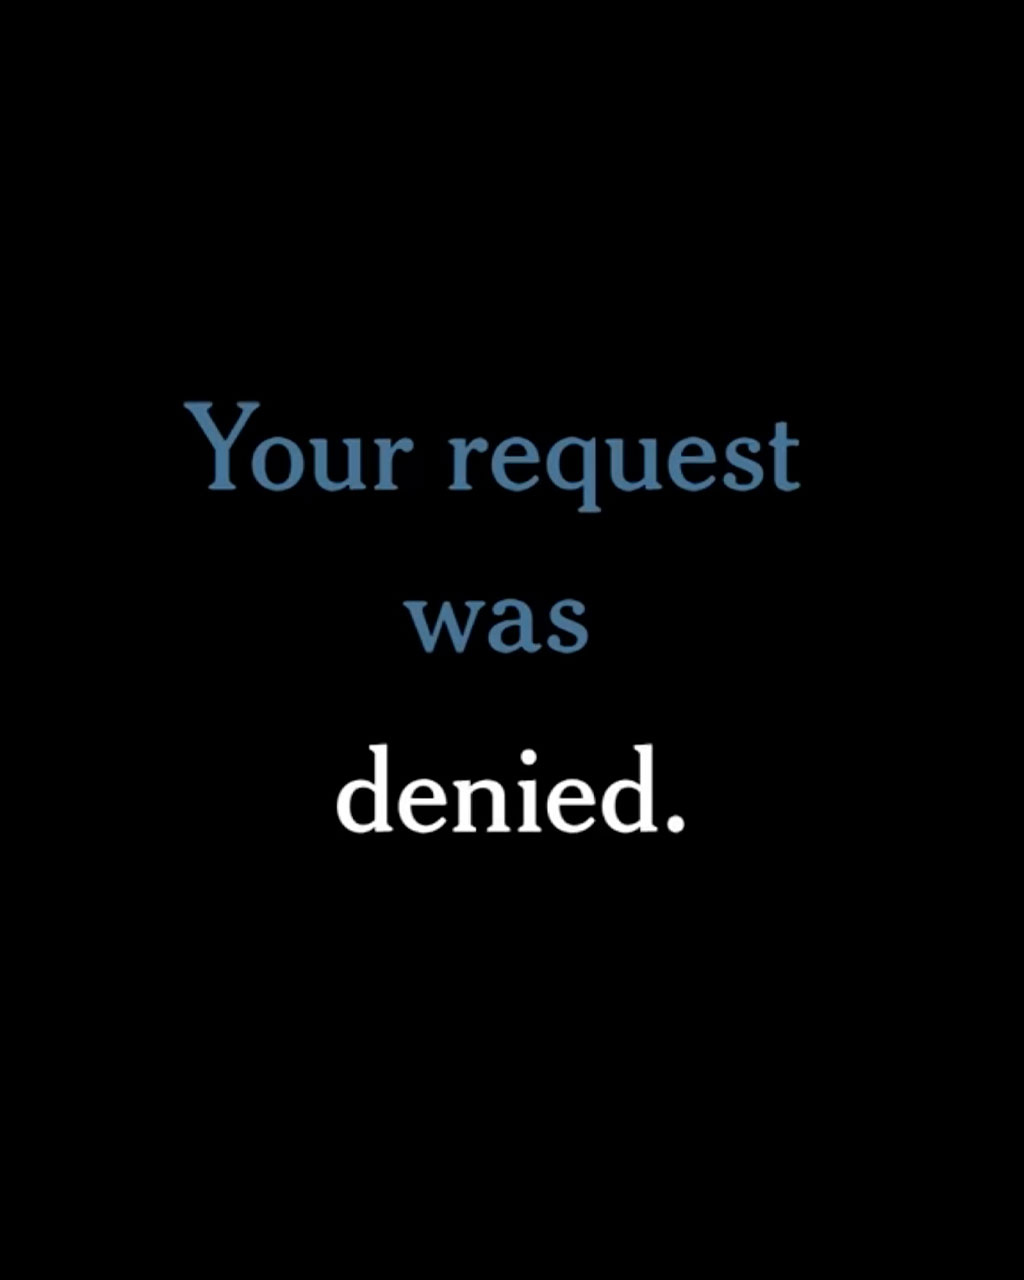 Your request was denied